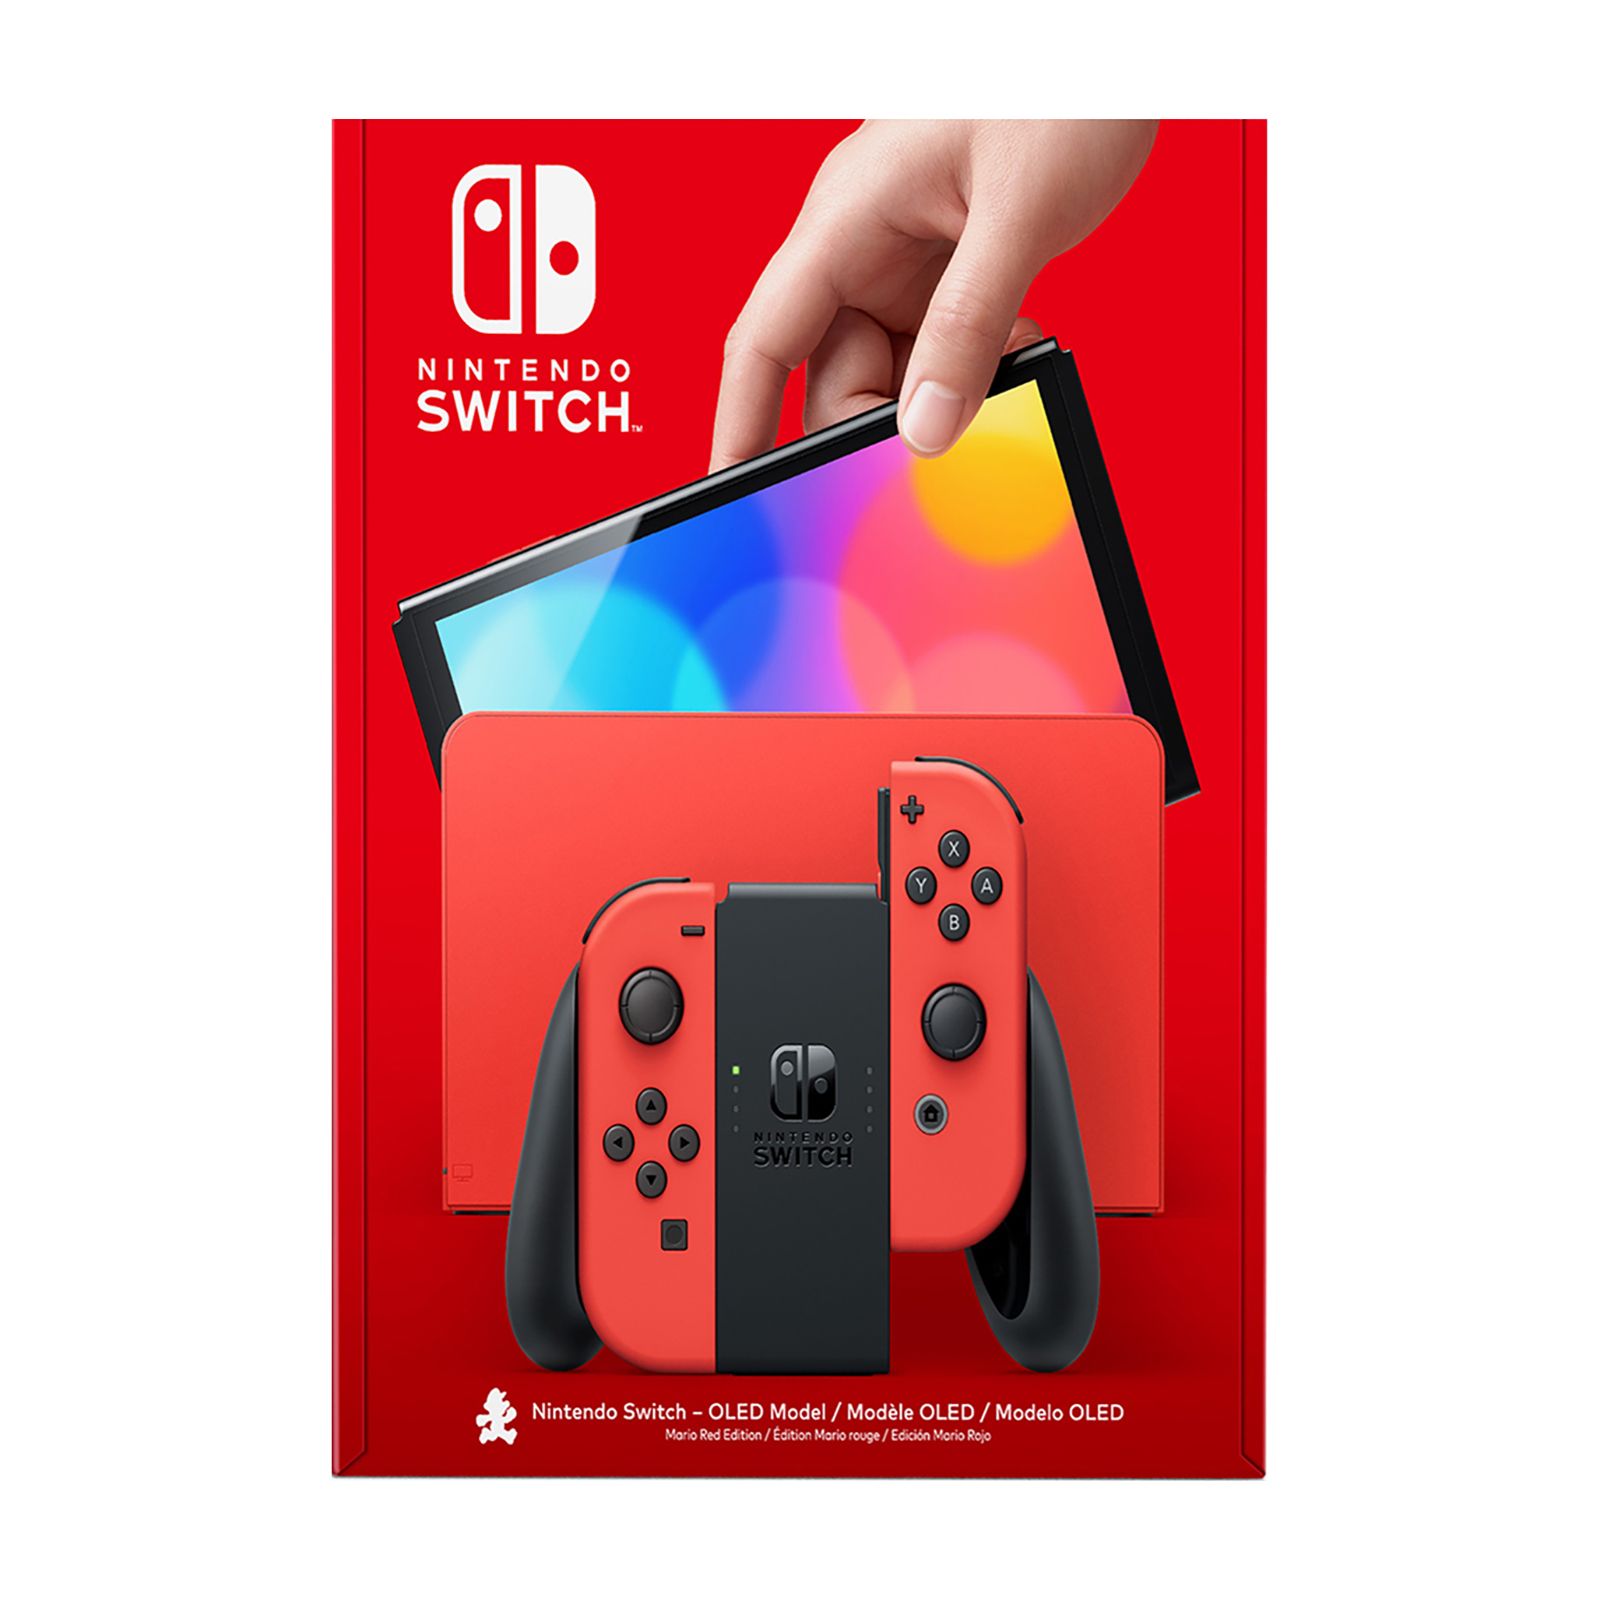 Nintendo Switch OLED (Mario Red Edition)